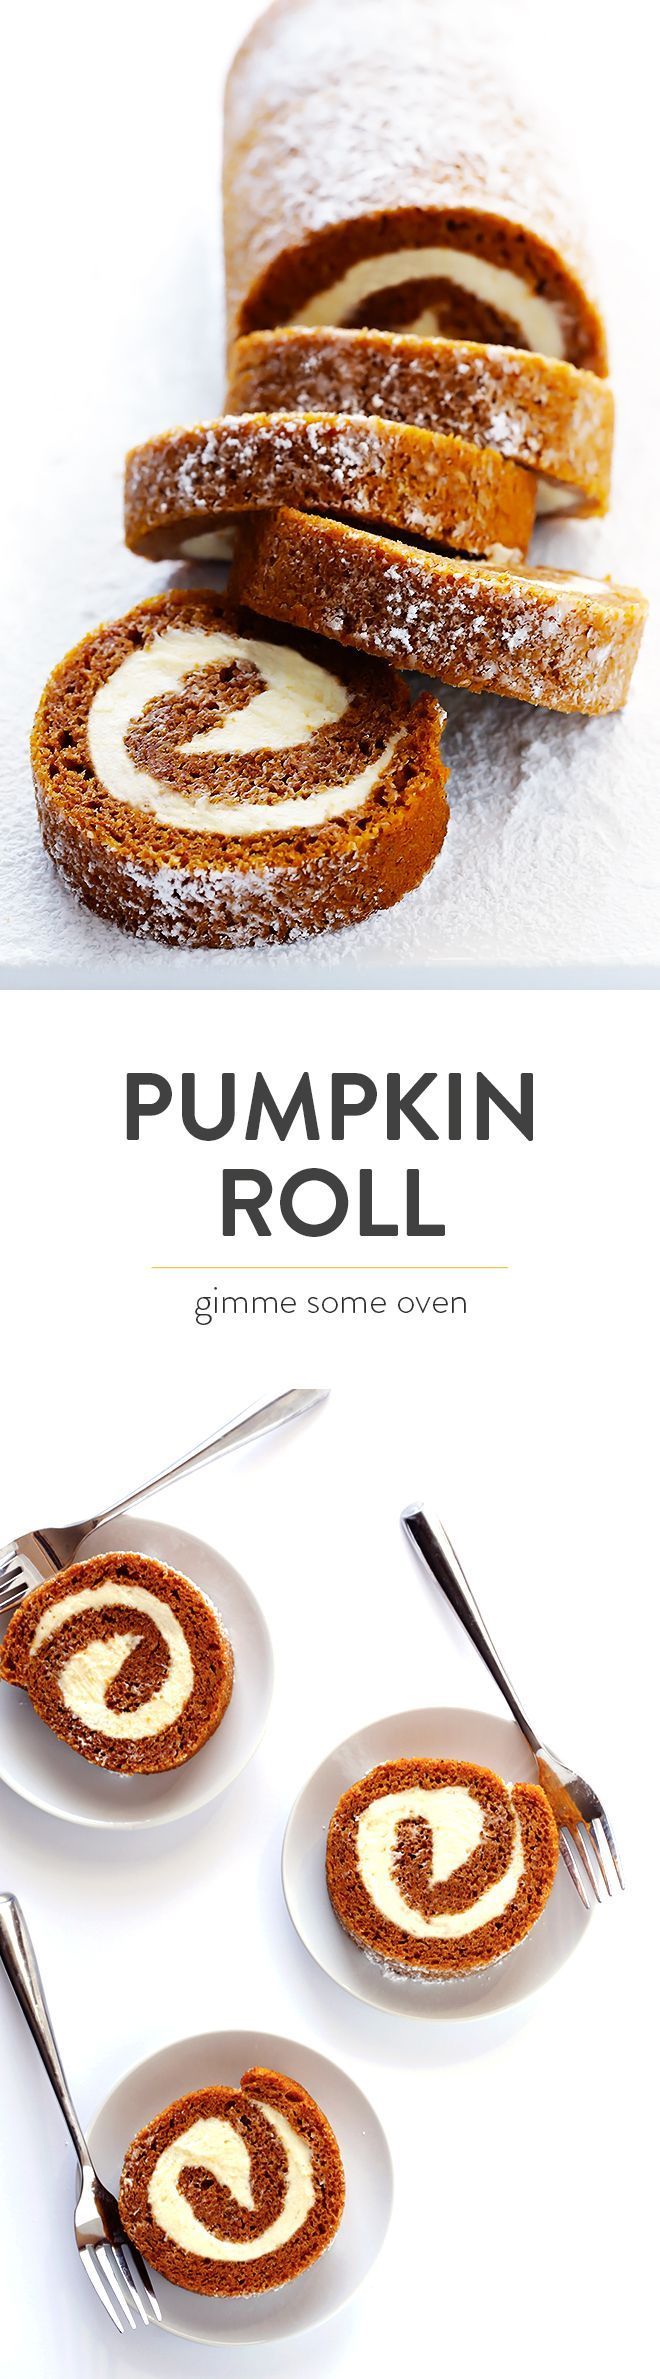 Learn how to make a classic pumpkin roll with this easy recipe and step-by-step tutorial (including a video!).  It’s surprisingly